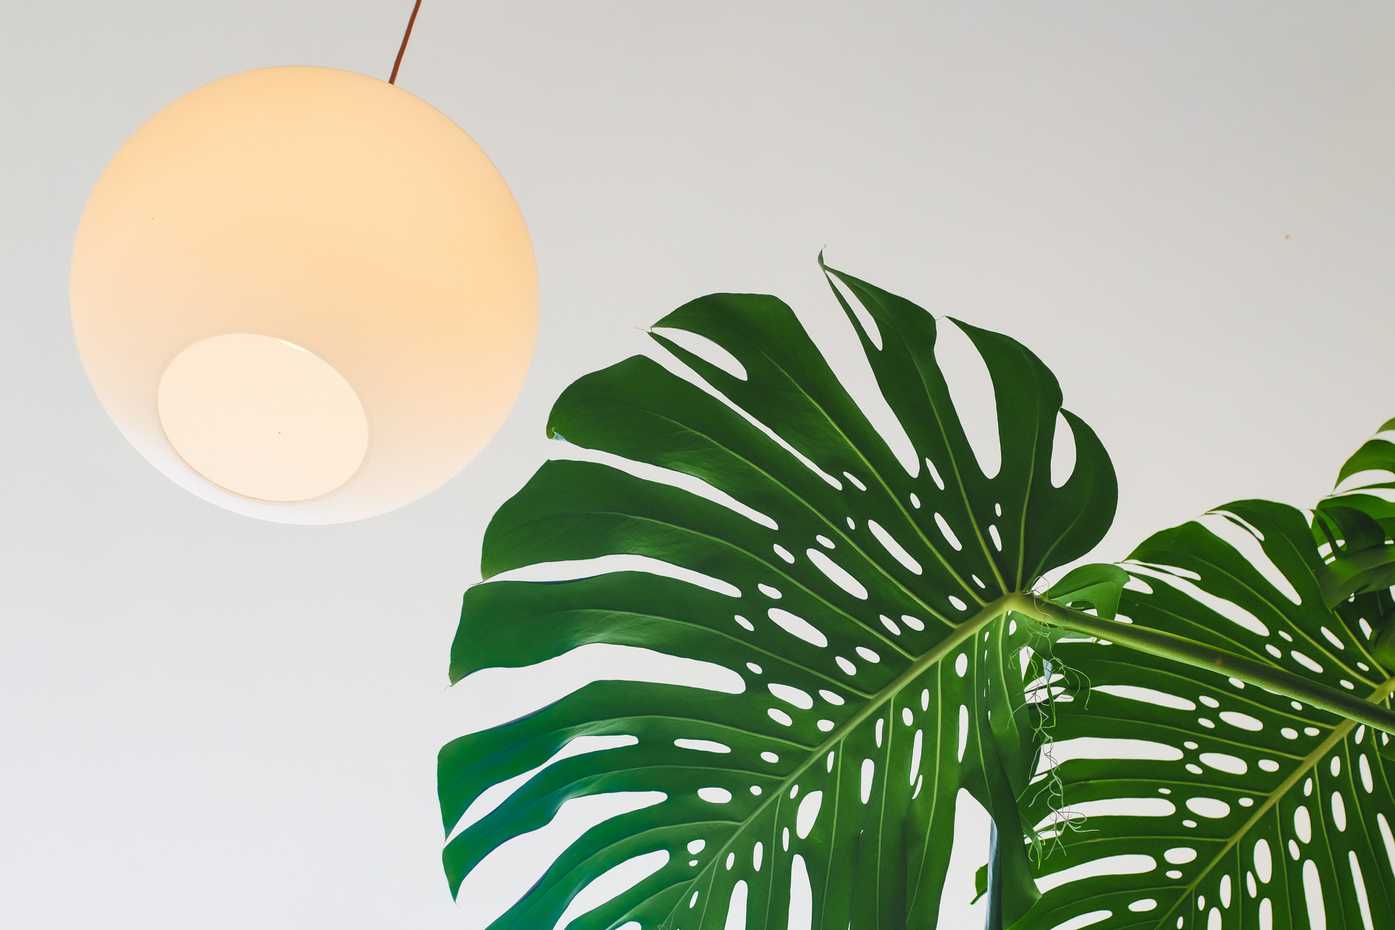 A ceiling light and a large plant leaf